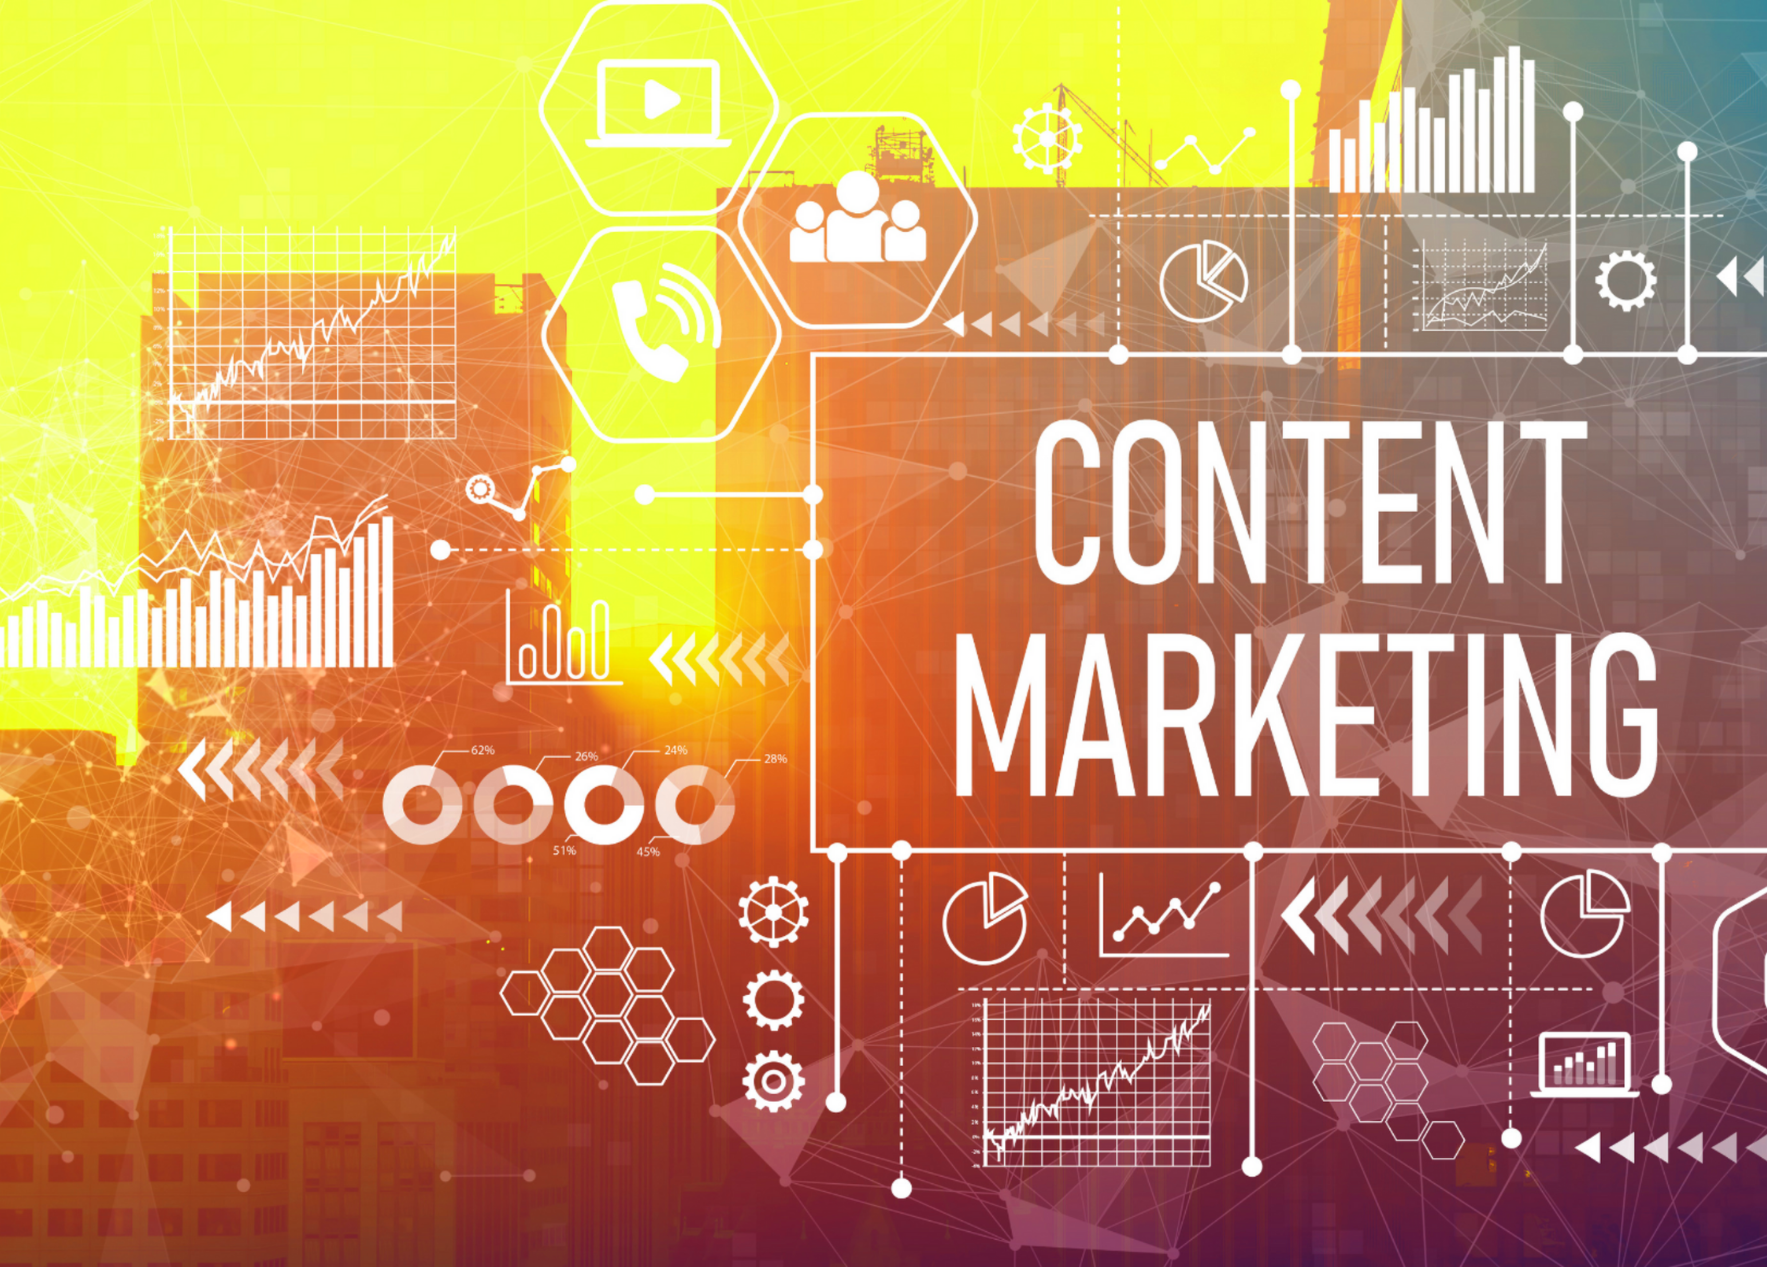 How to use content marketing as a way to increase your business